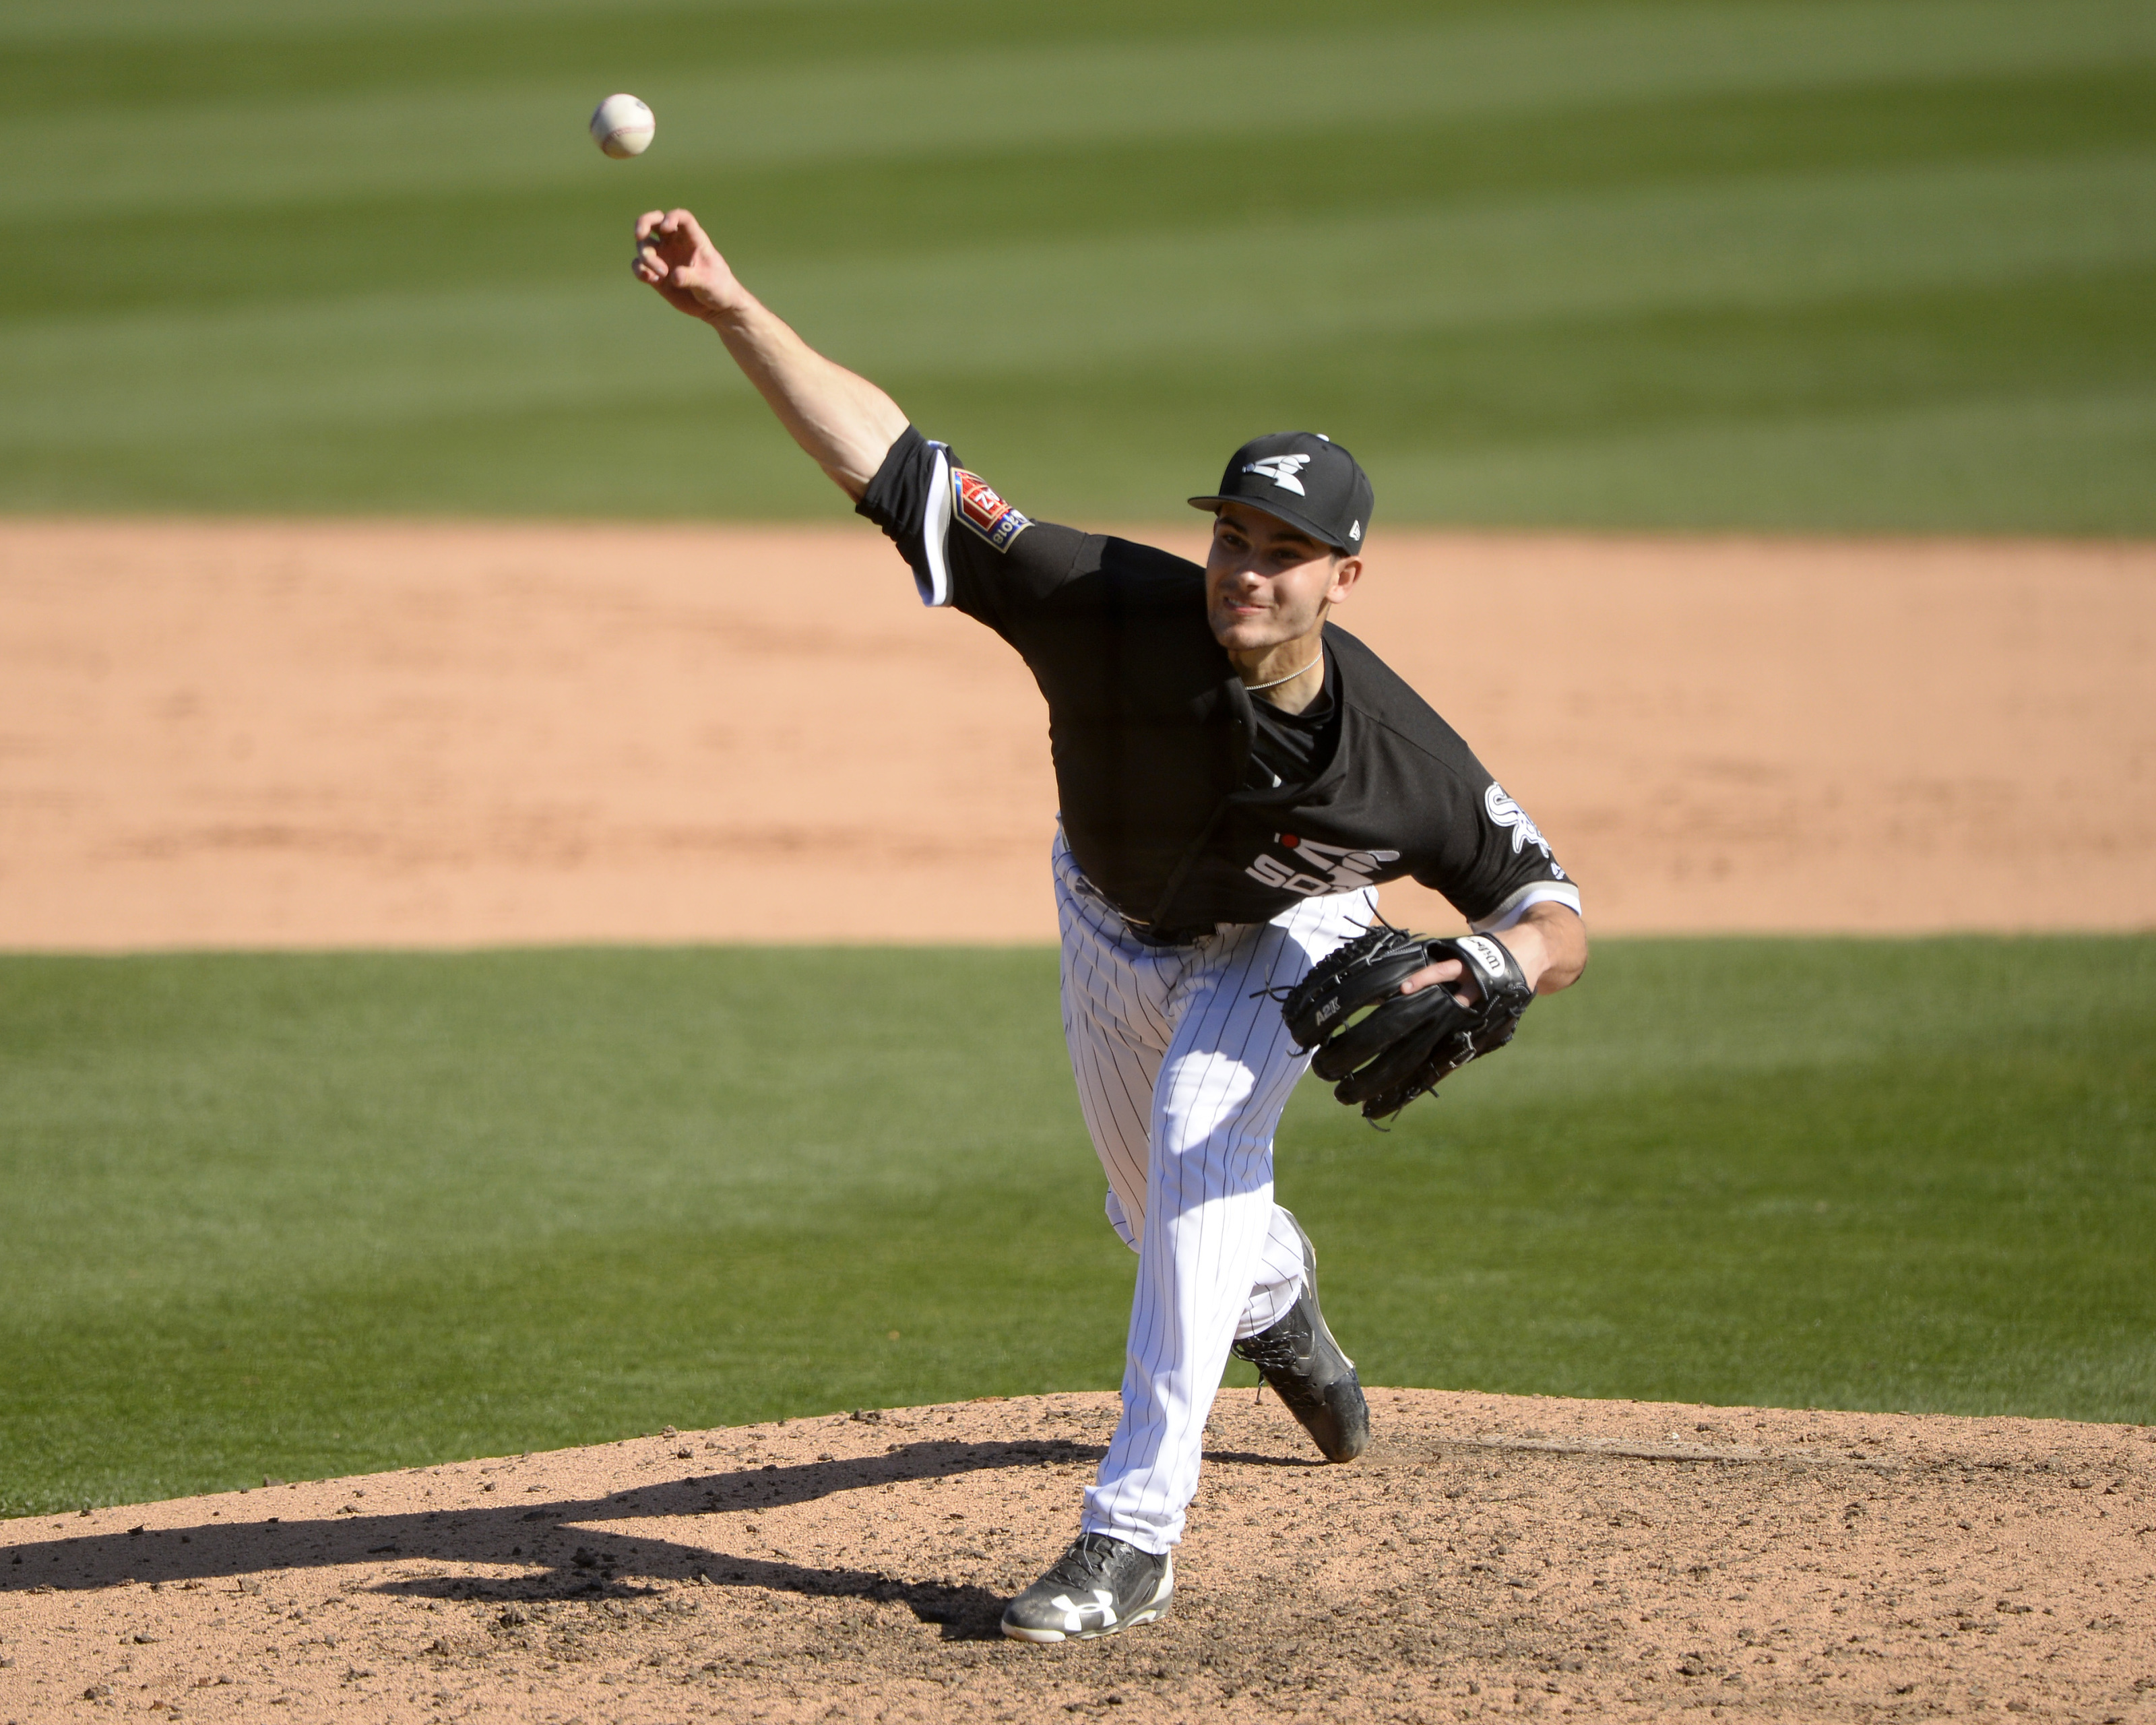 Chicago White Sox scouting report on Dylan Cease - Page 2